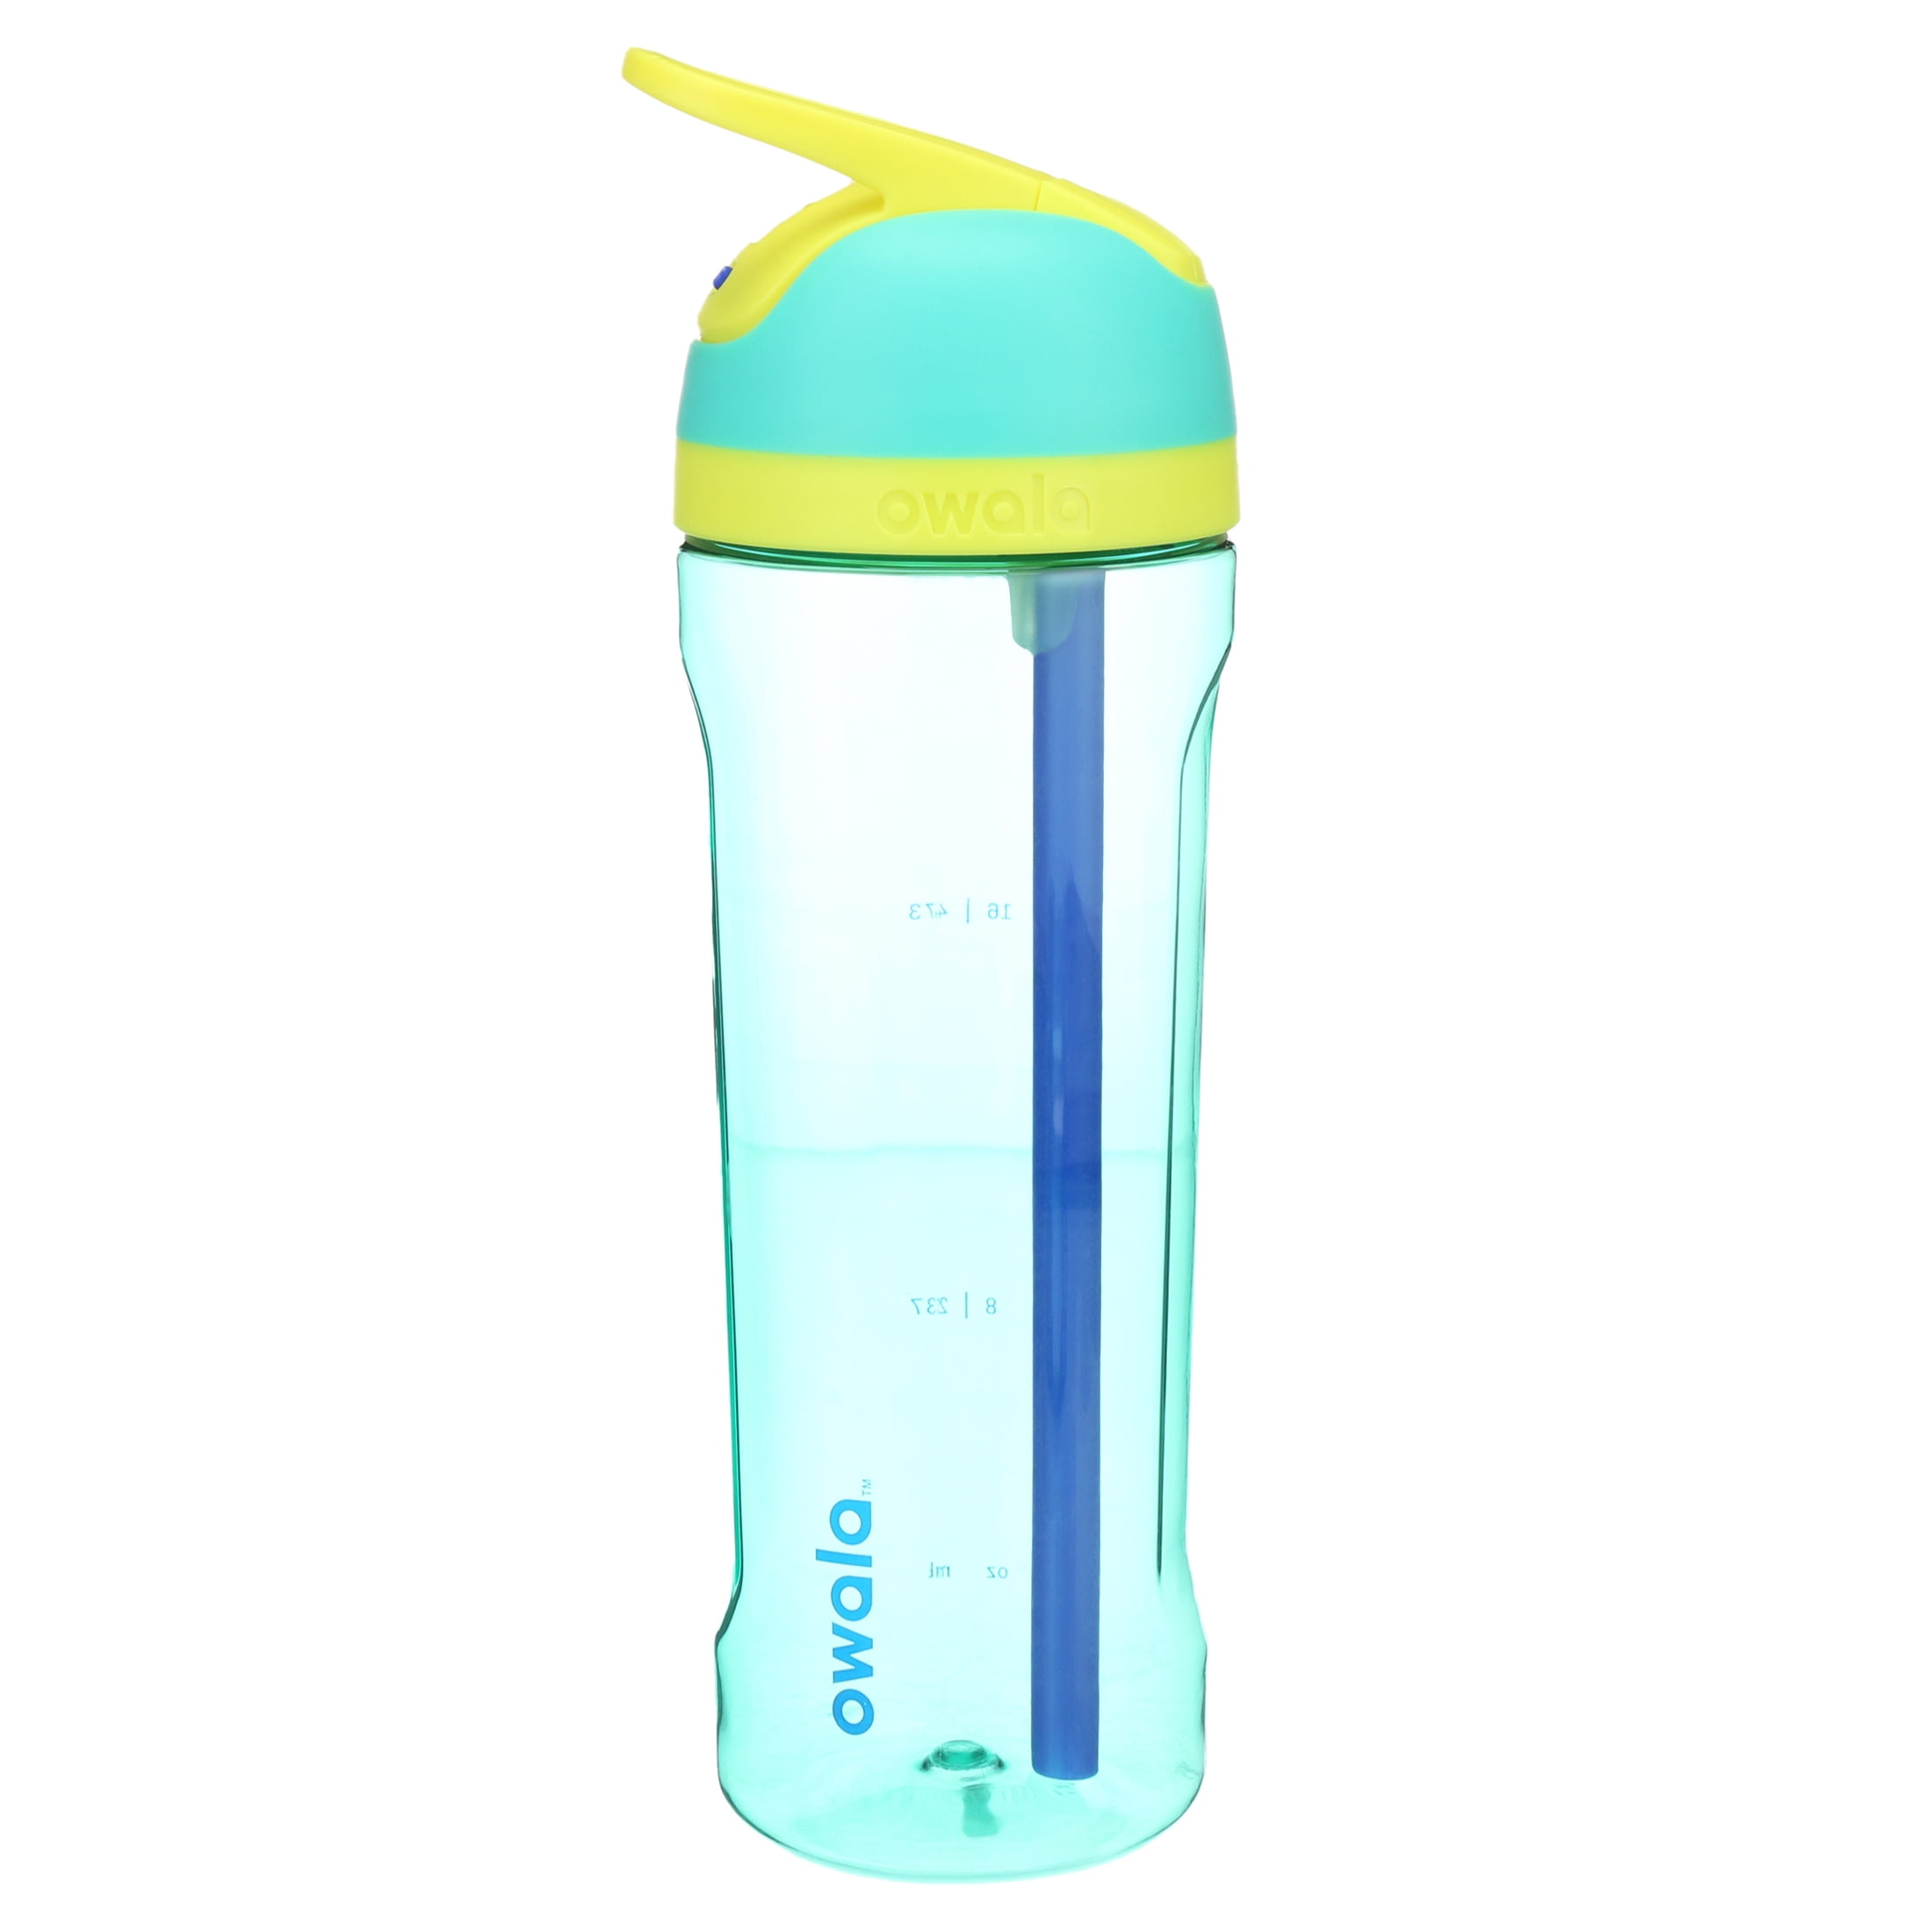 I dont care that i'm obsessed #owalawaterbottle #owalabottle #waterbot, owala  water bottle